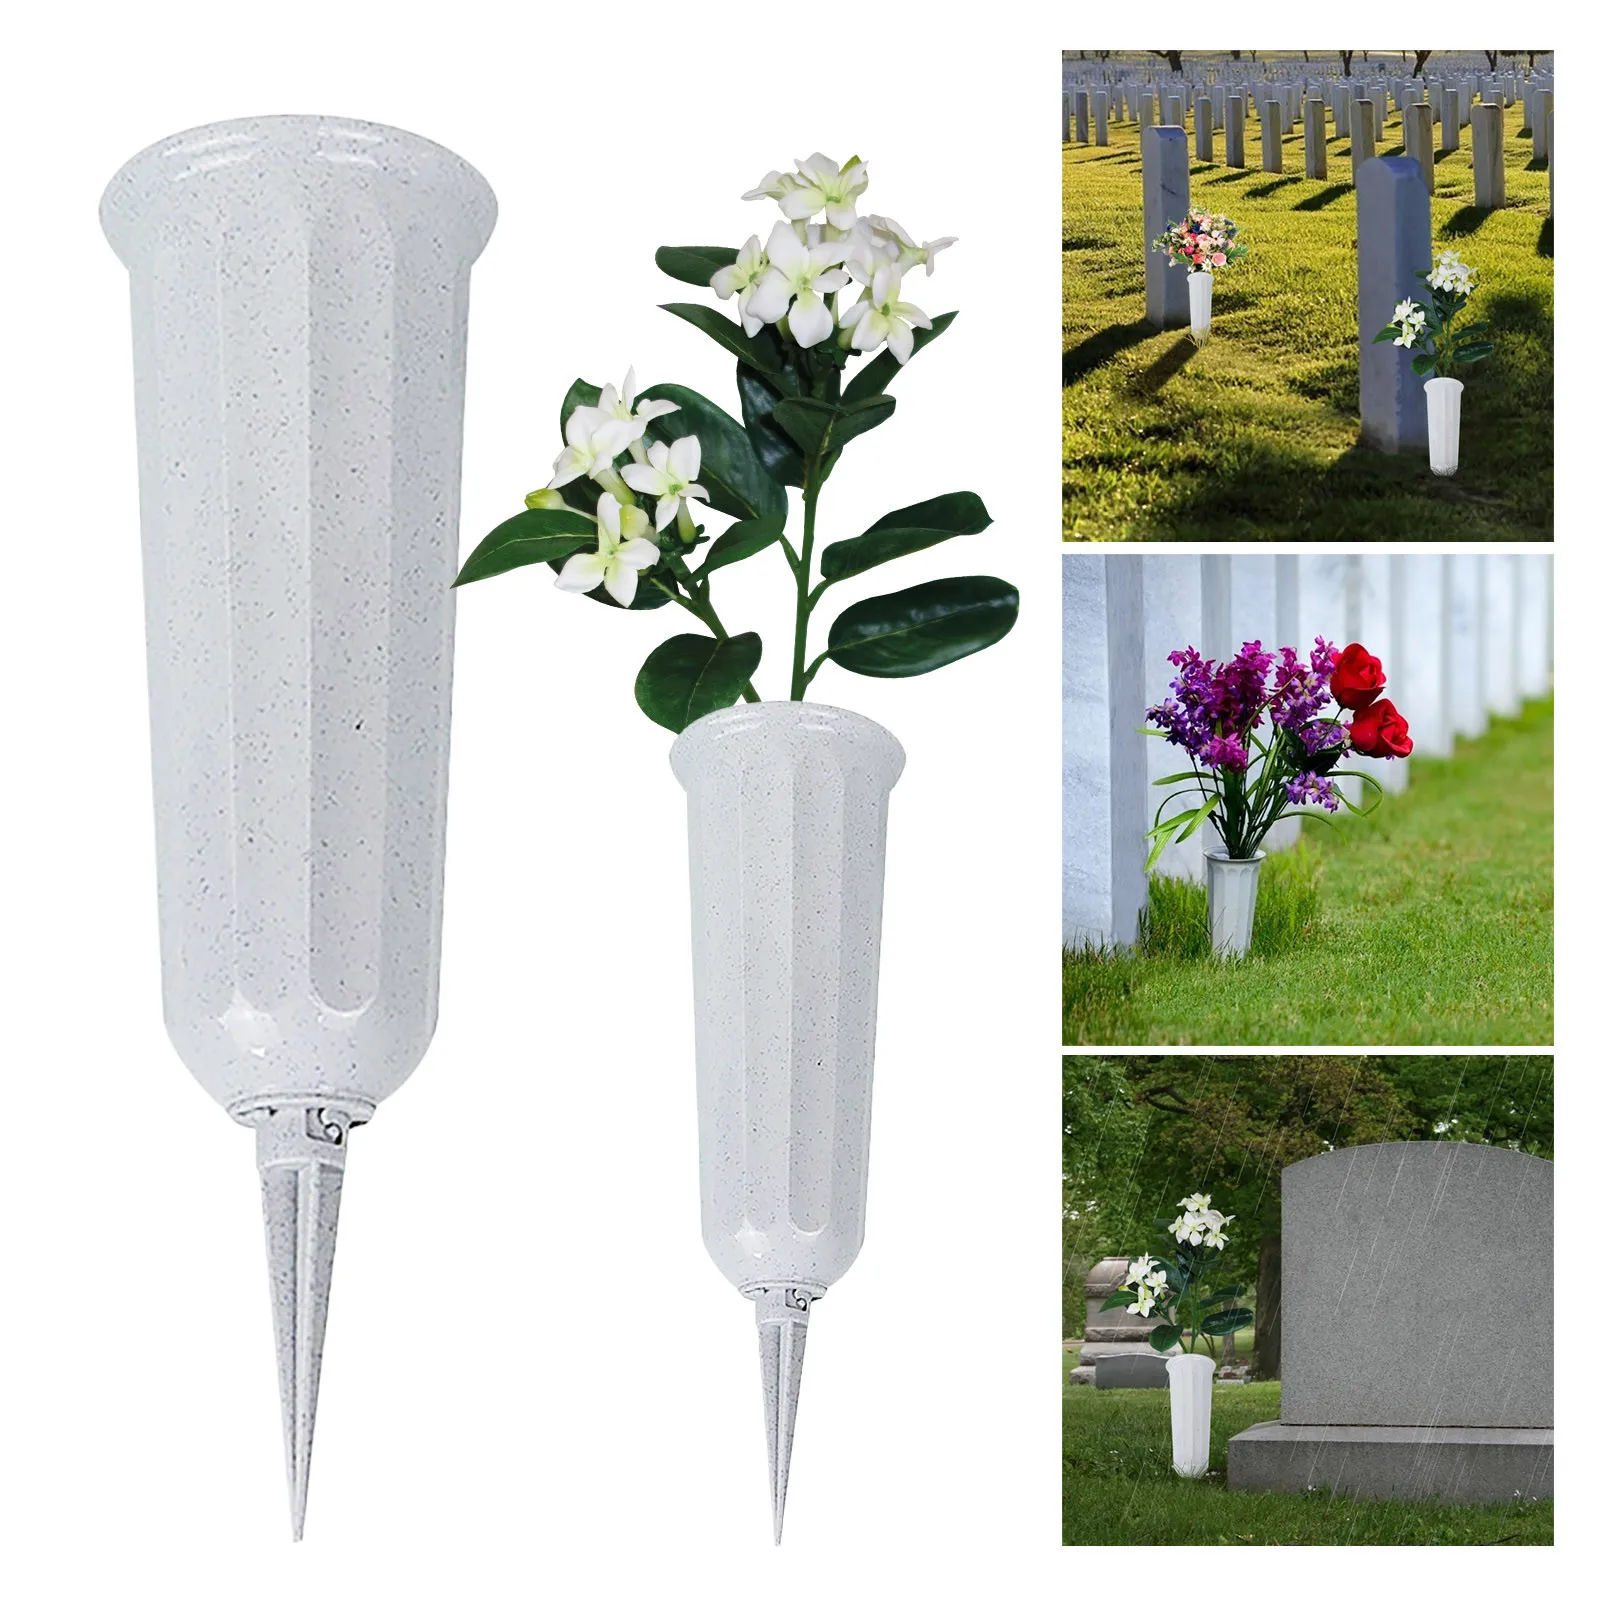 

Cemetery Flower Vase Memorial Floral Vase With-Stake Plastic In Ground Cemetery